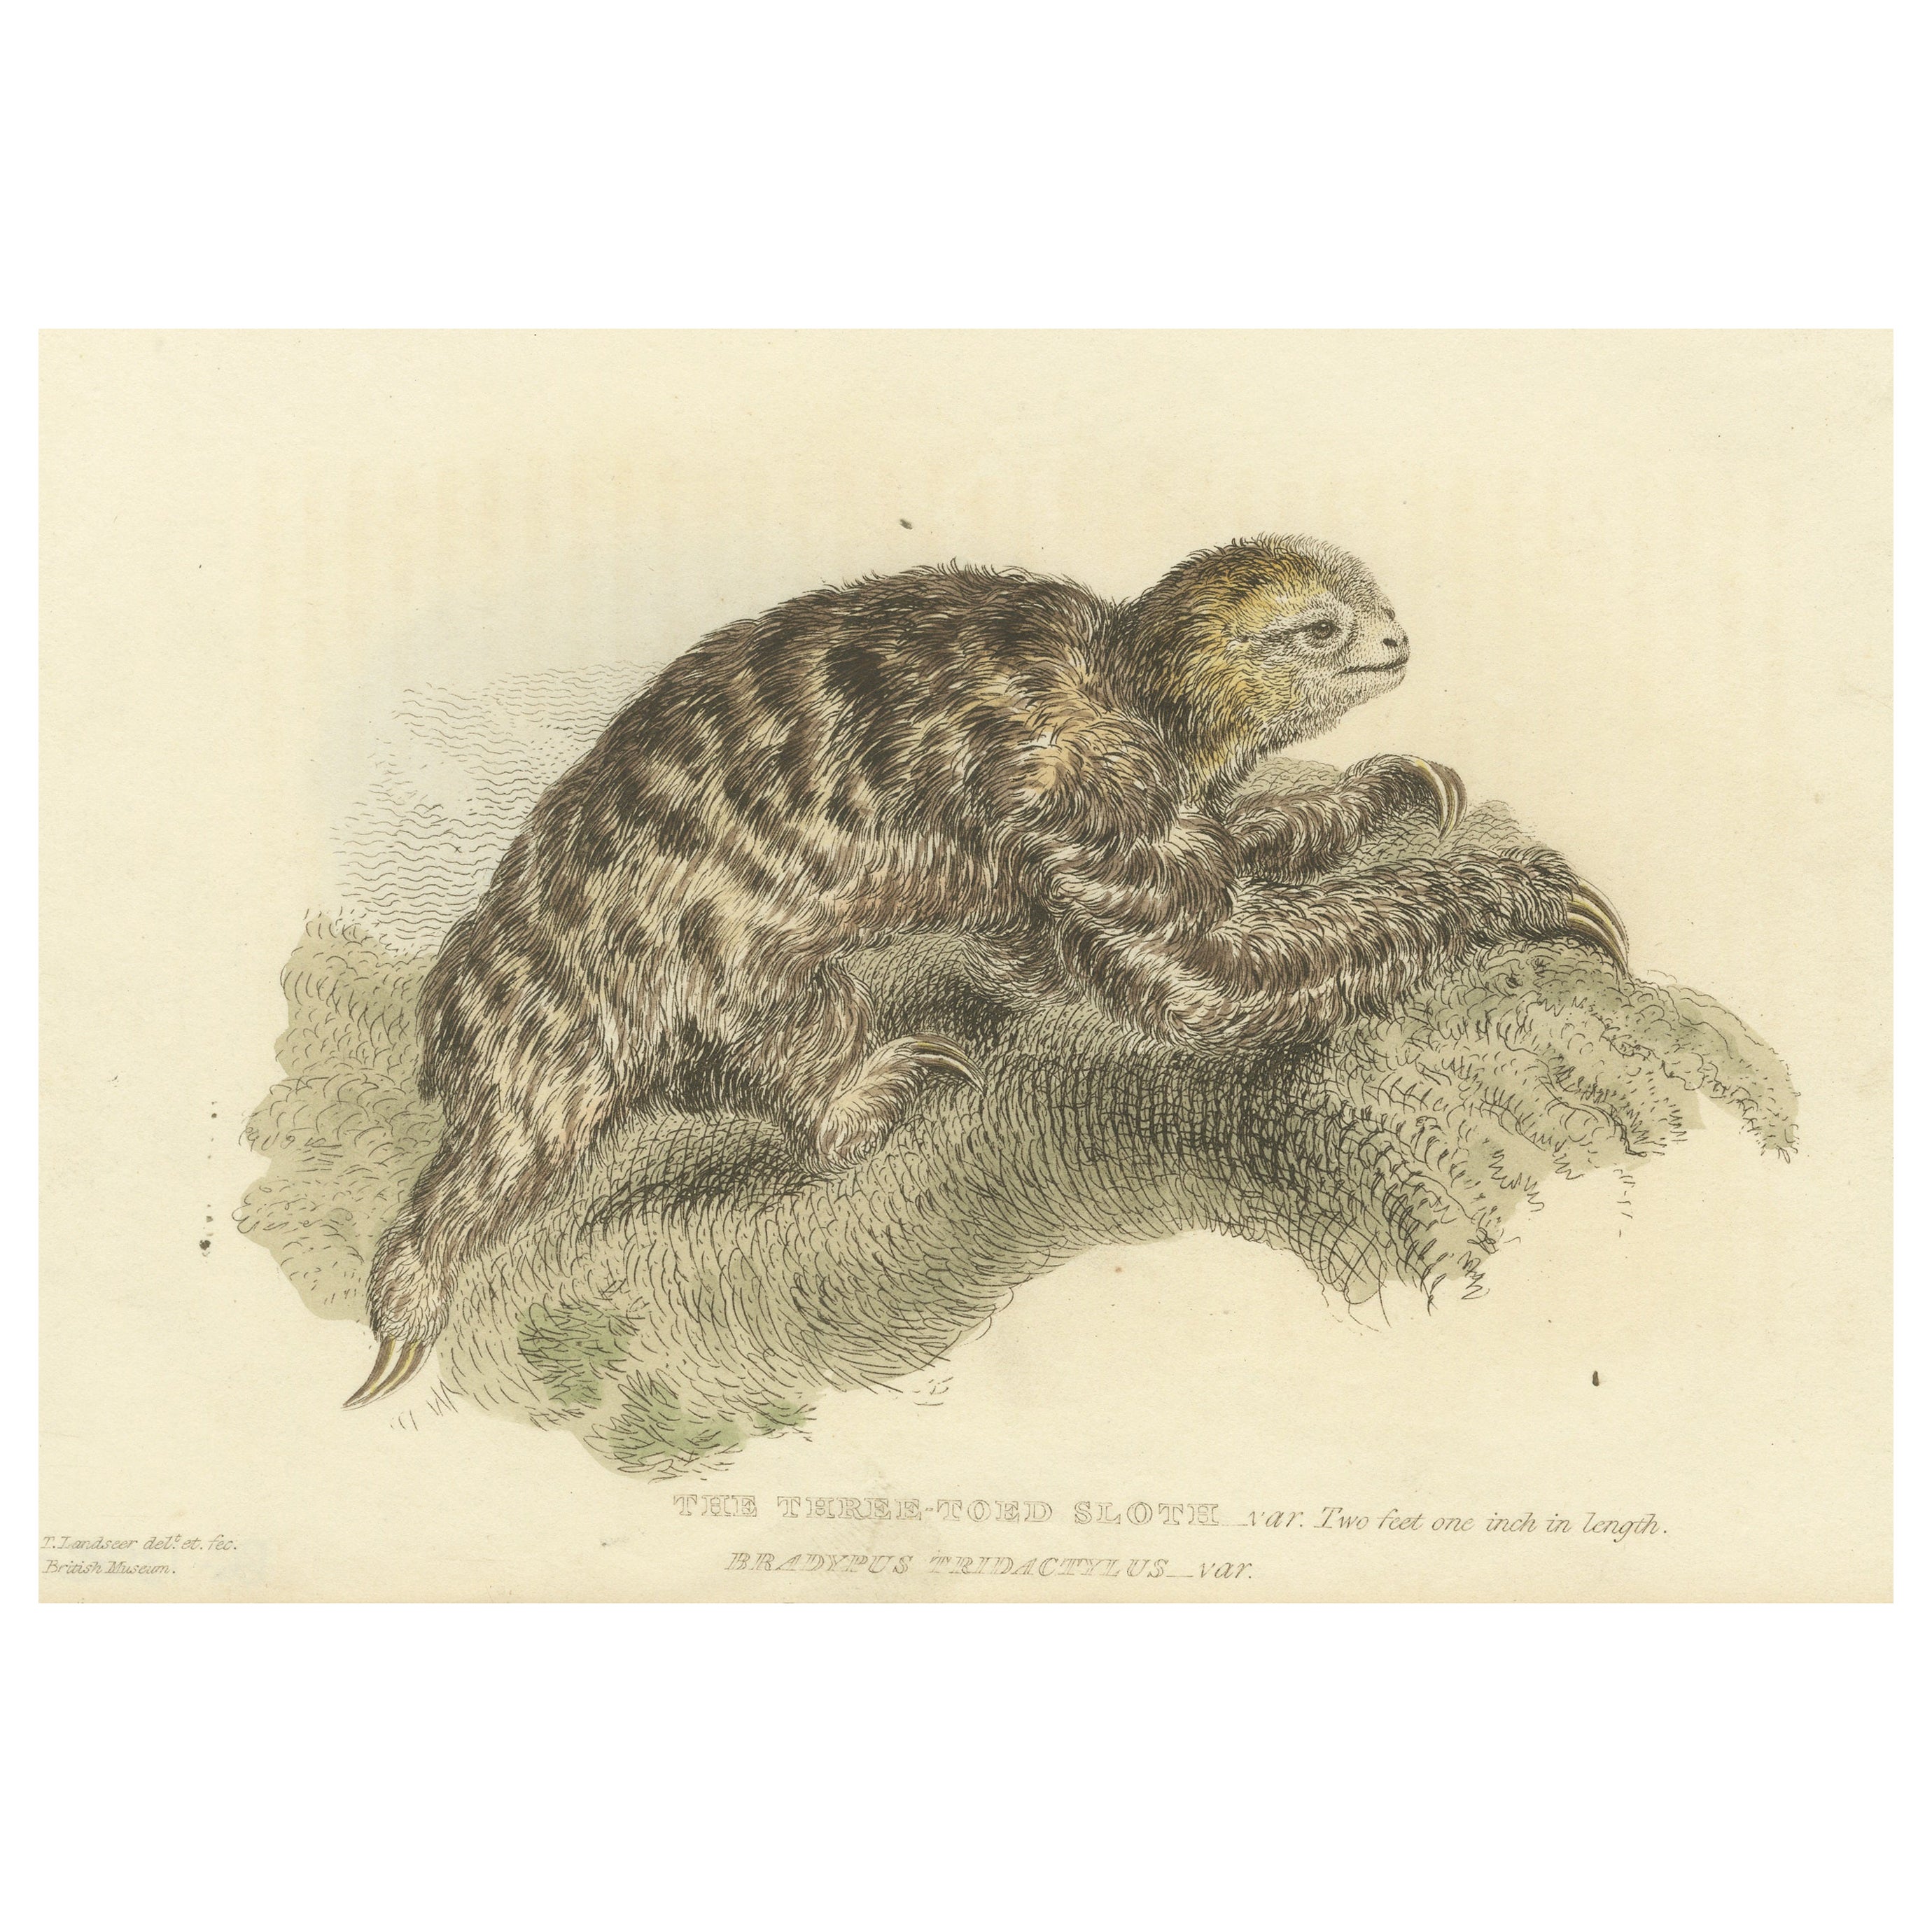 Antique Print with Hand Coloring of a Three-Toed Sloth